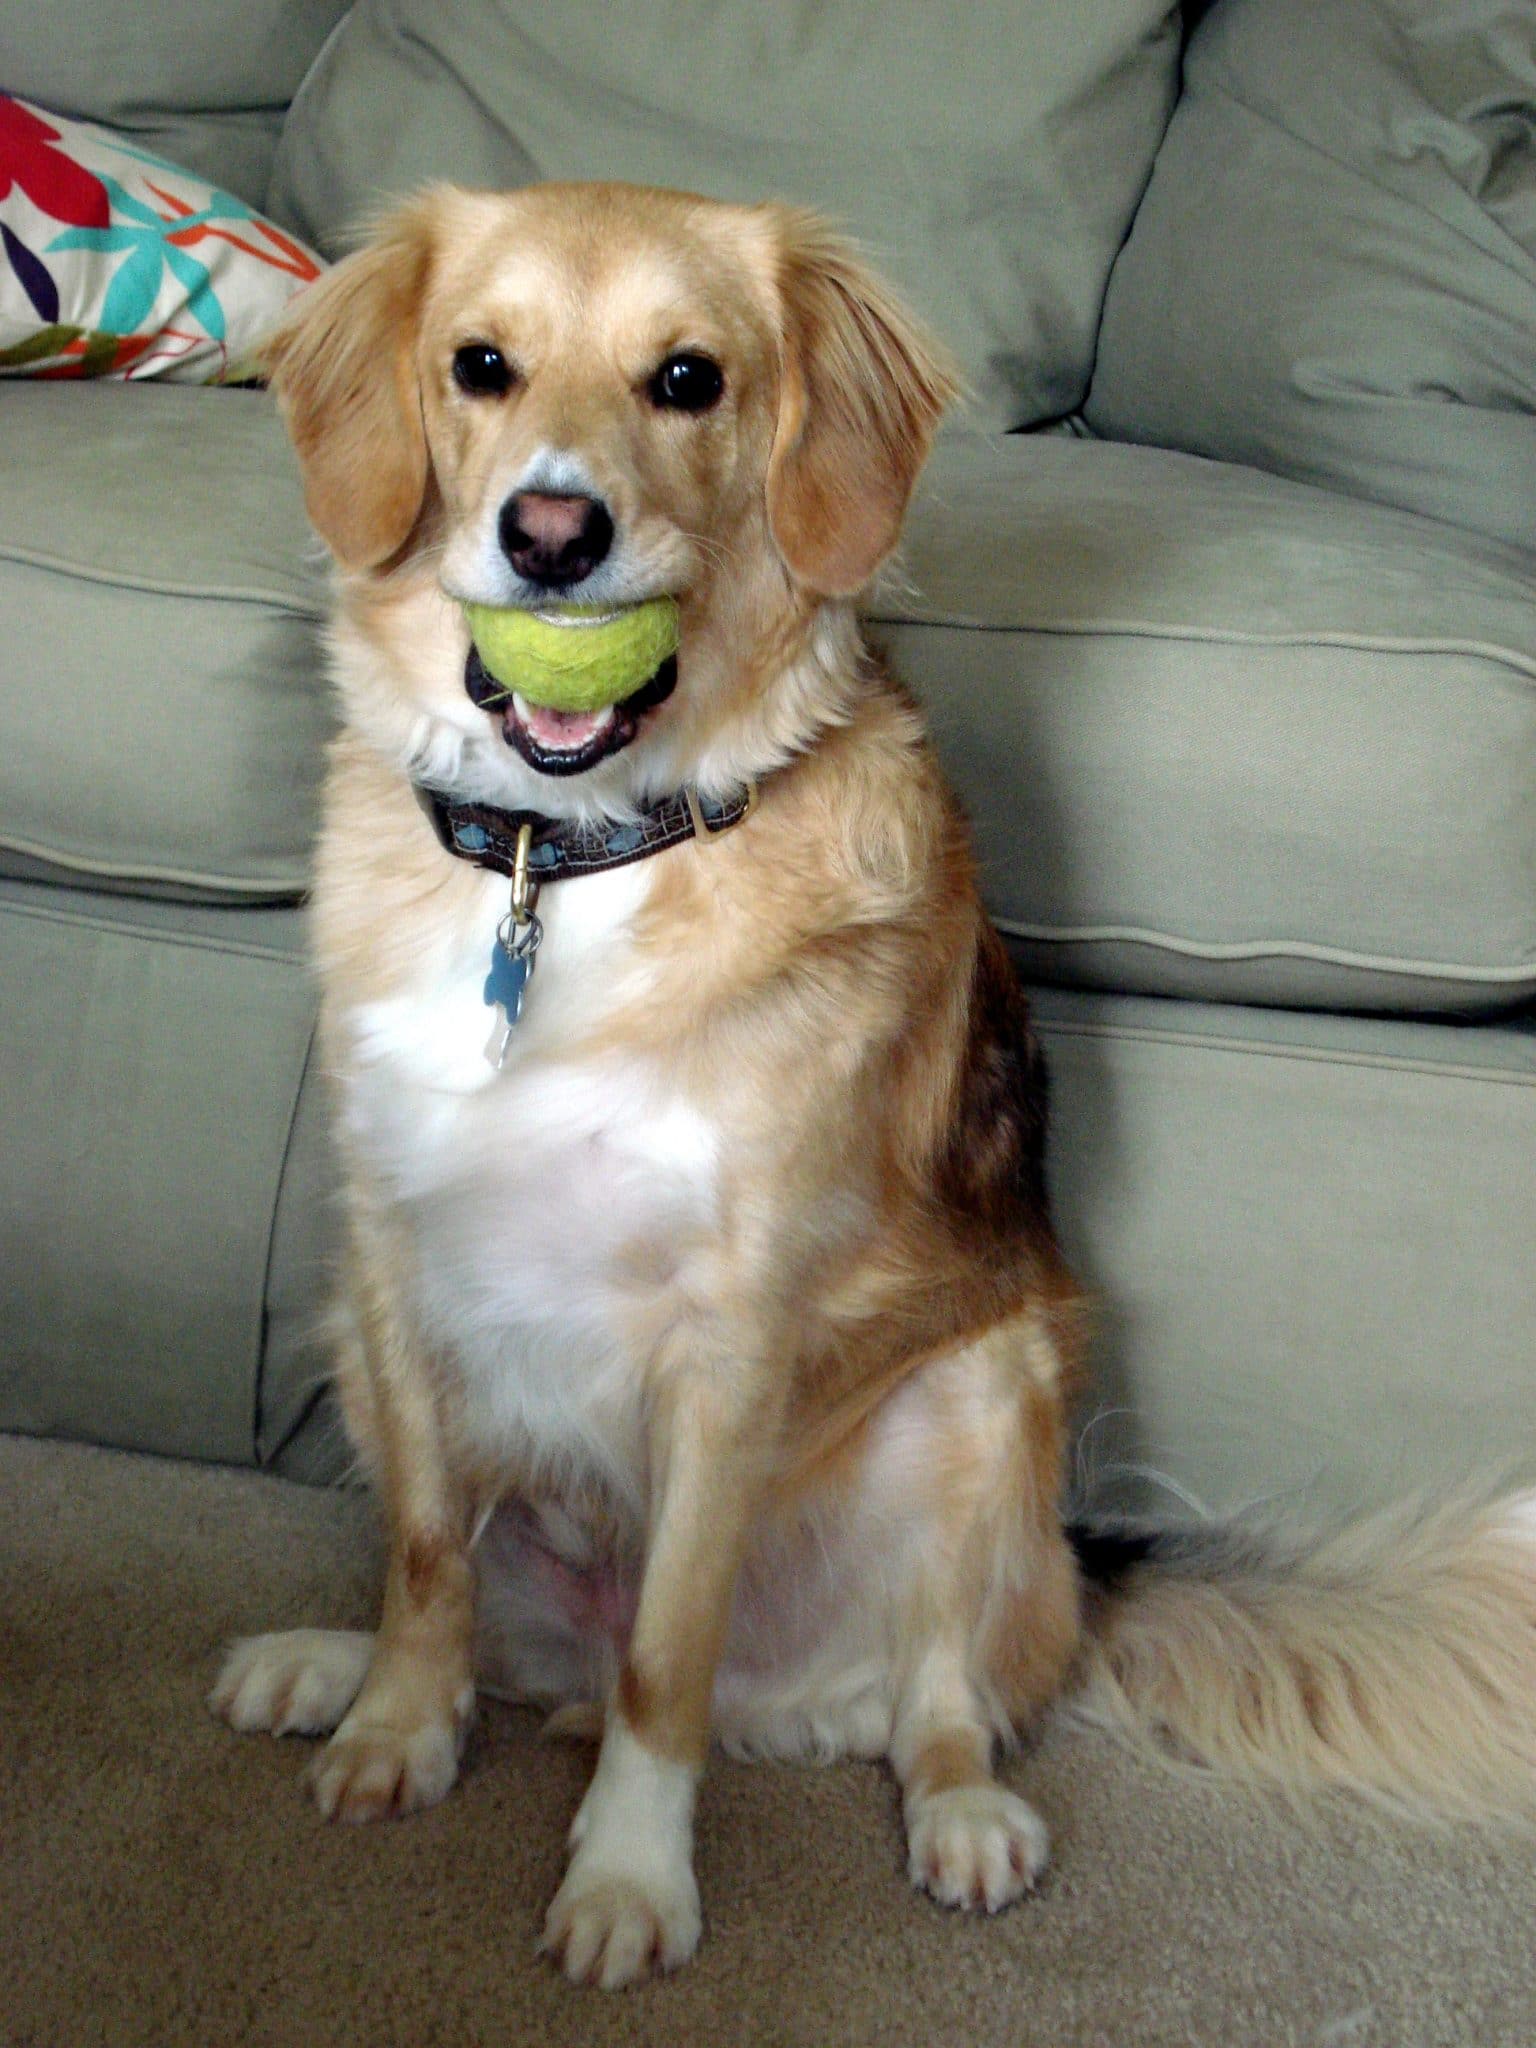 Golden retriever with tennis ball in mouth